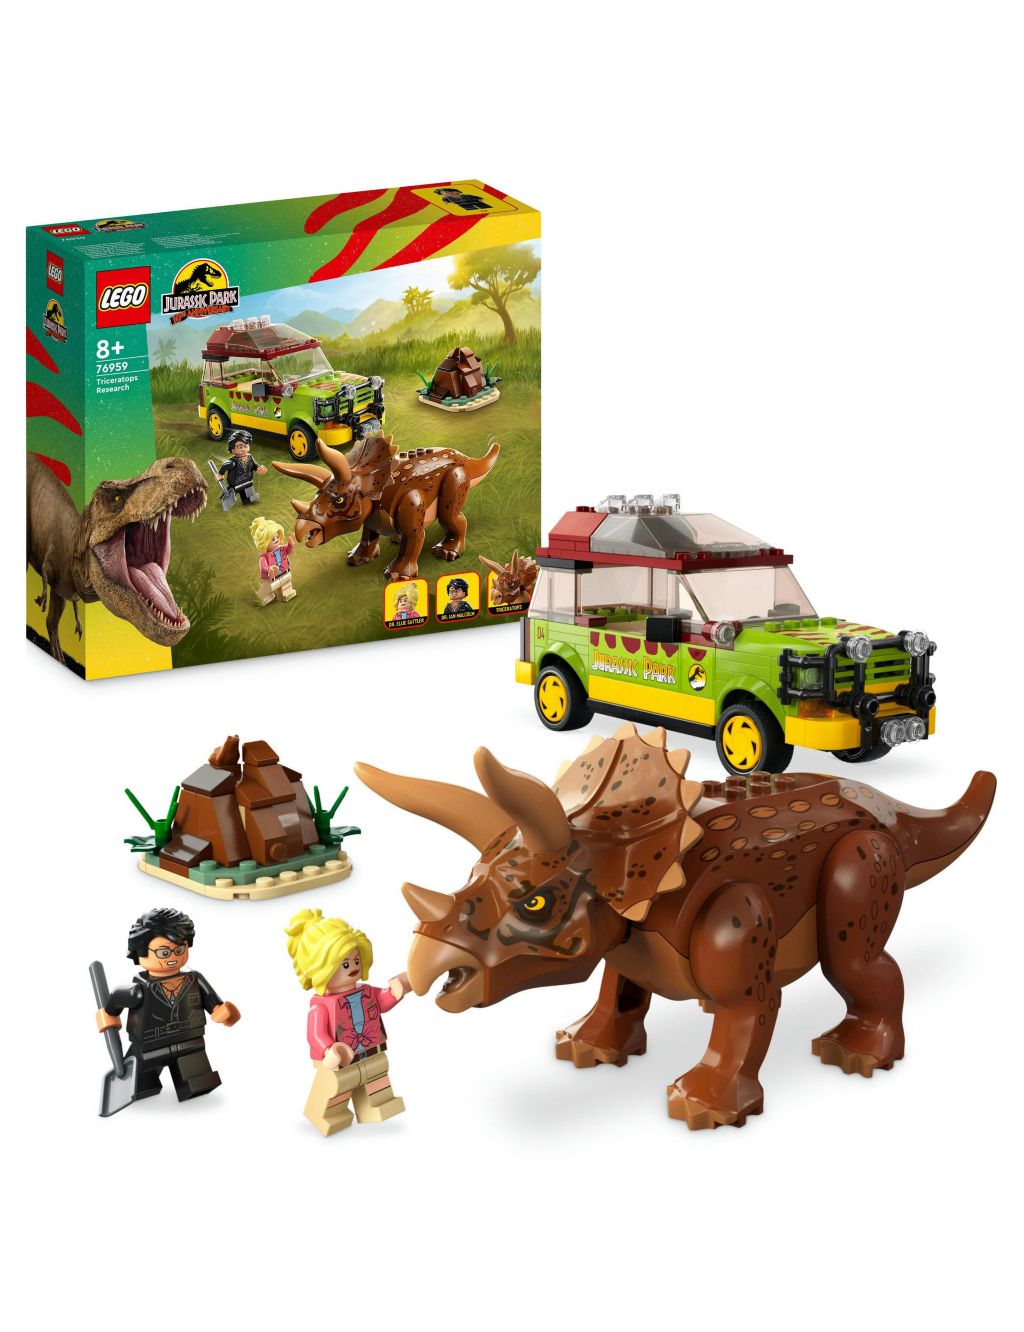 LEGO Jurassic Park Triceratops Research Set 76959 (8+ Yrs) 3 of 6